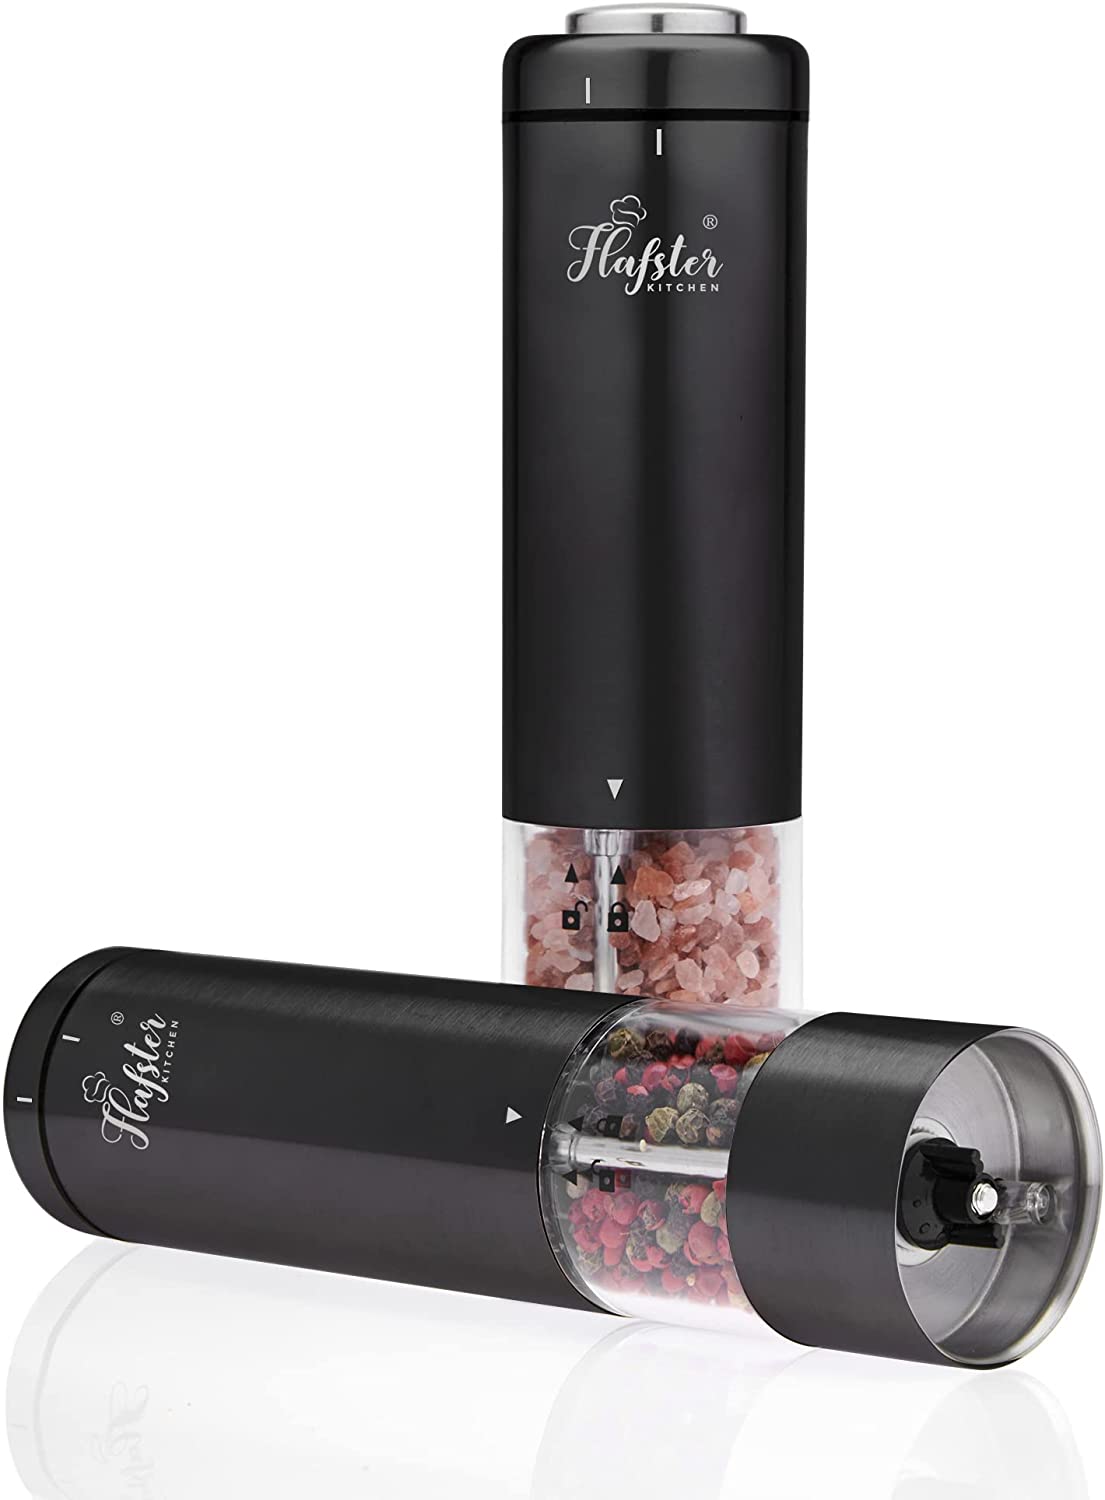 Unboxing and Review of the Flafster Salt & Pepper Grinder Set 